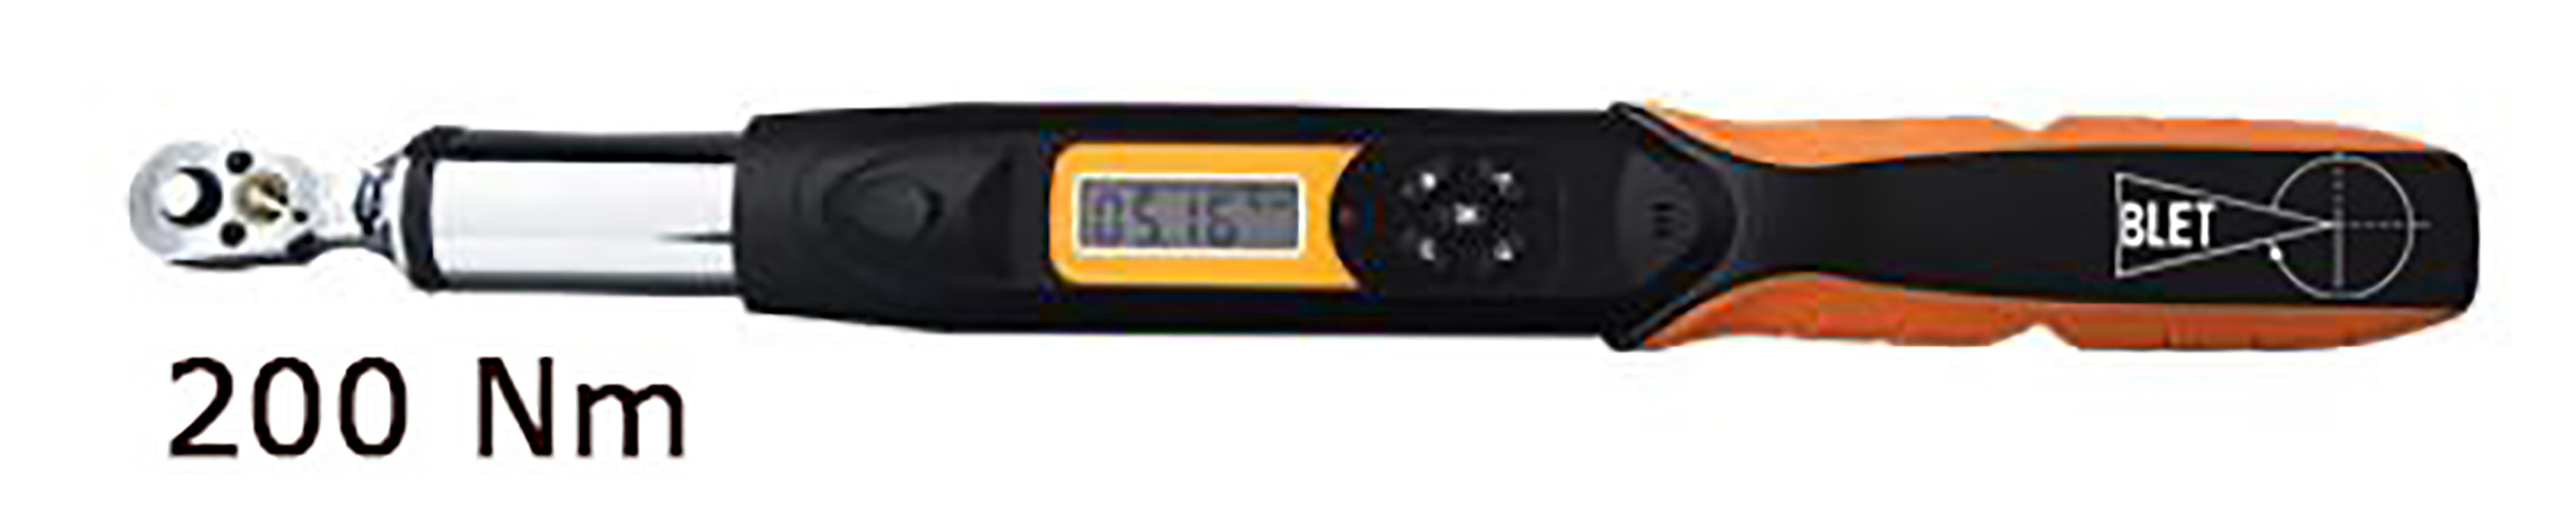 DIGITAL TORQUE WRENCH WITH COMMUNICATION 200 Nm READING 0,1 Nm SIZE 1/2" BLET<br>Ref : CLET5-CDP20012